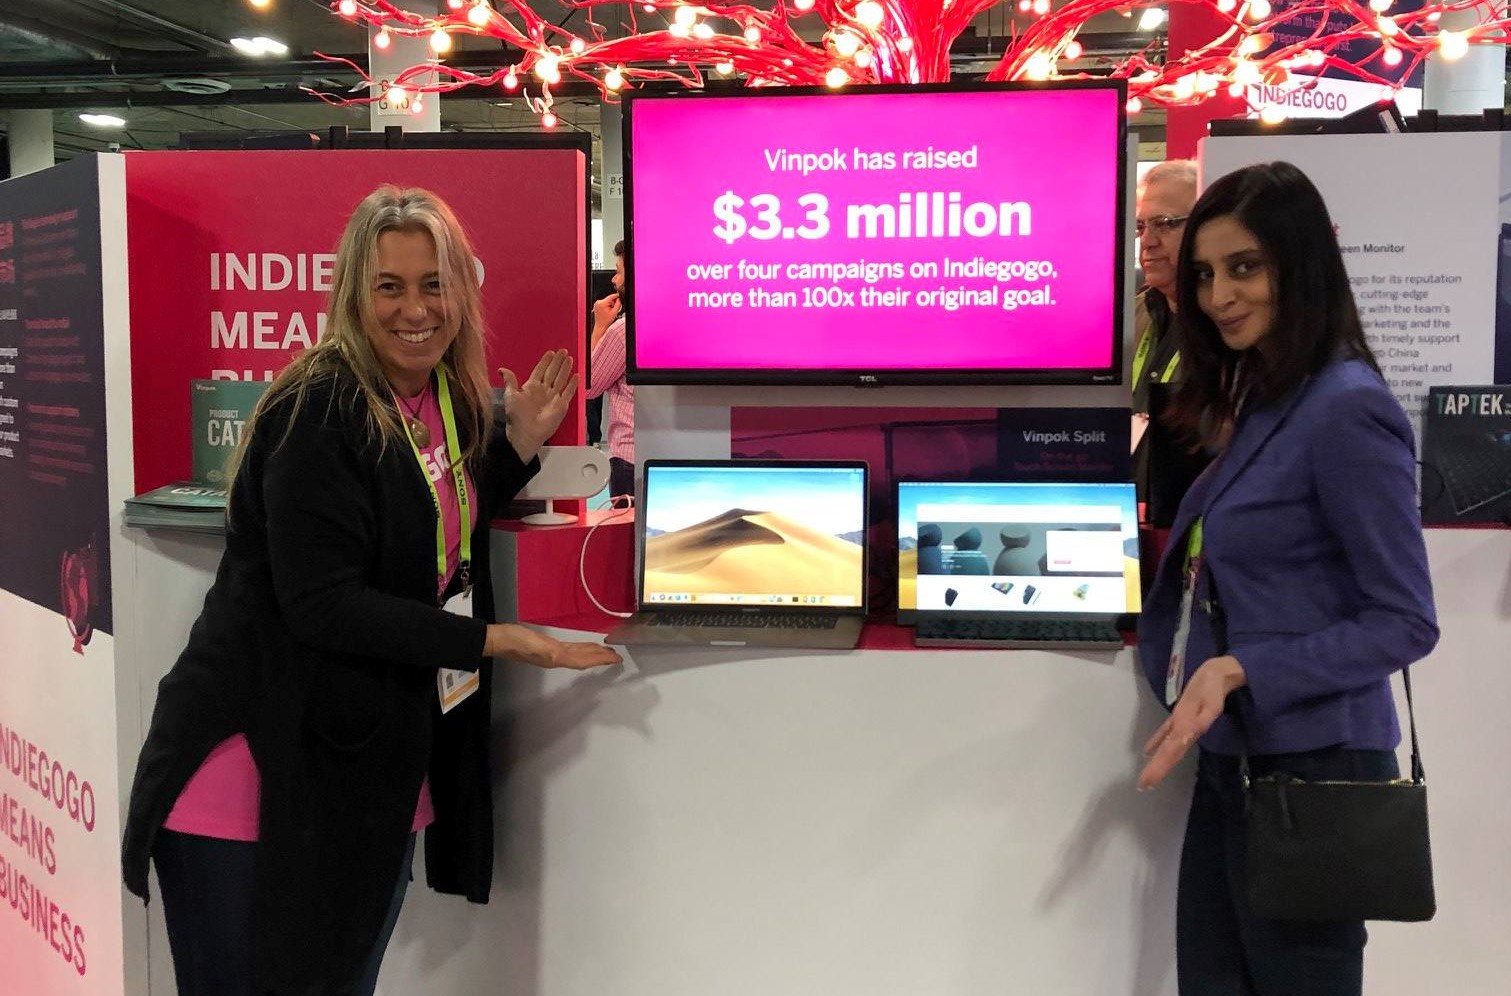 Indiegogo staff at their booth in a tradeshow